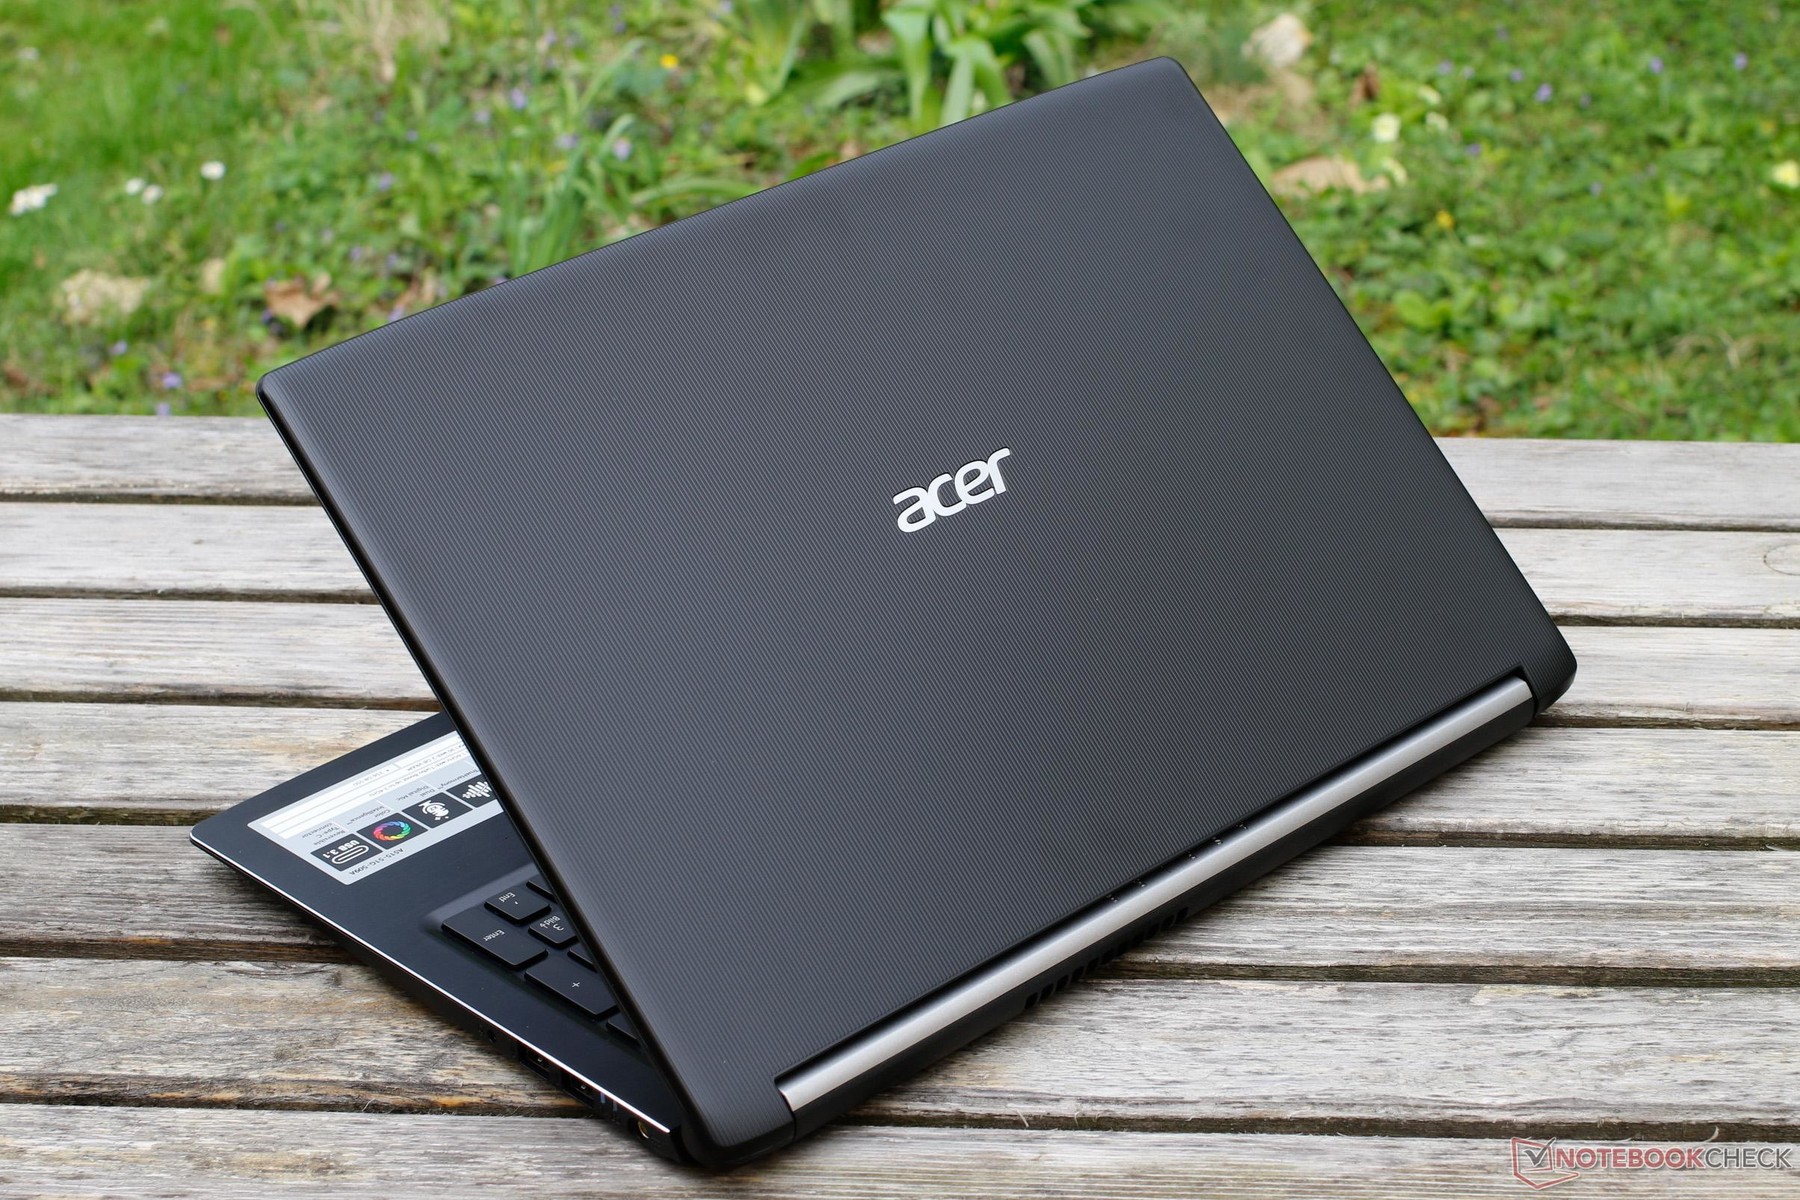 Acer Aspire 5 Review: Intel’s Ice Lake CPU’s Come To The Budget Aspire Line